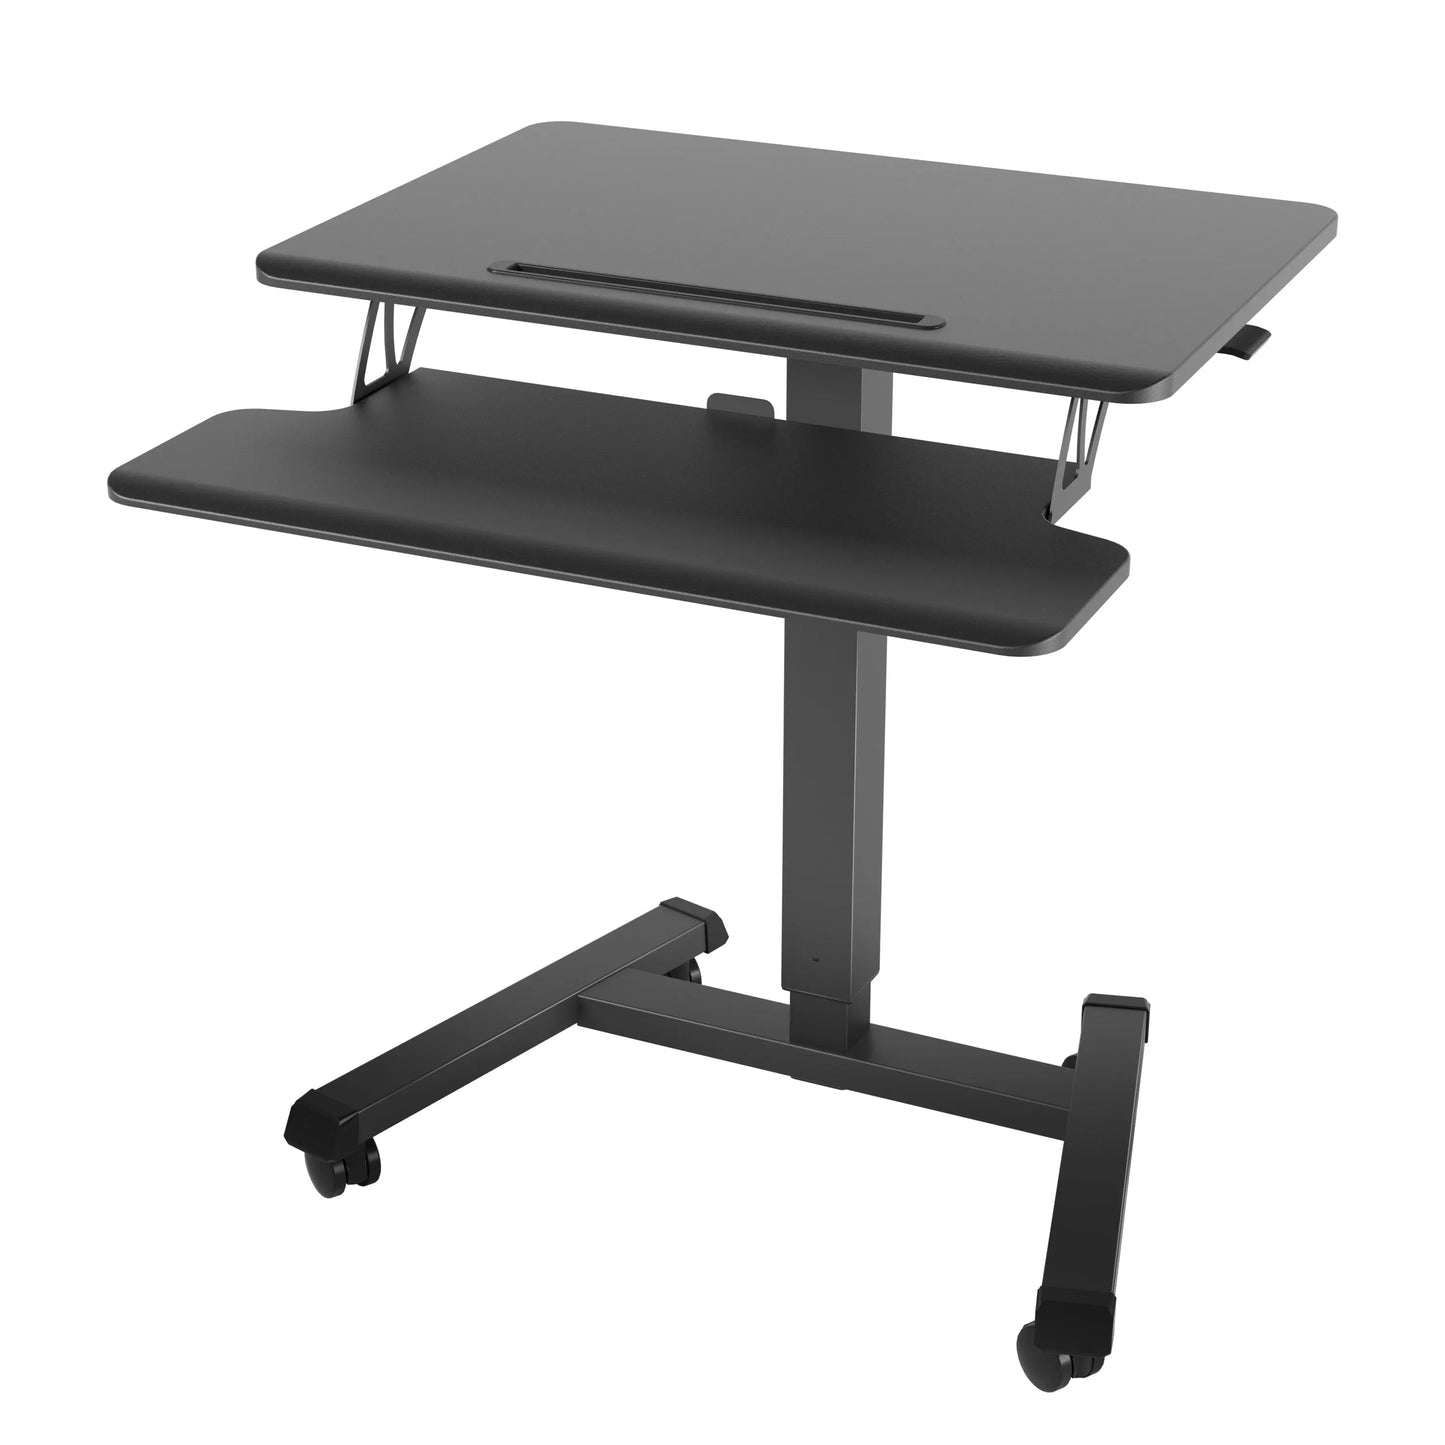 ProMounts Mobile Desk Workstation with Keyboard Tray Holds up to 18lbs (Black)